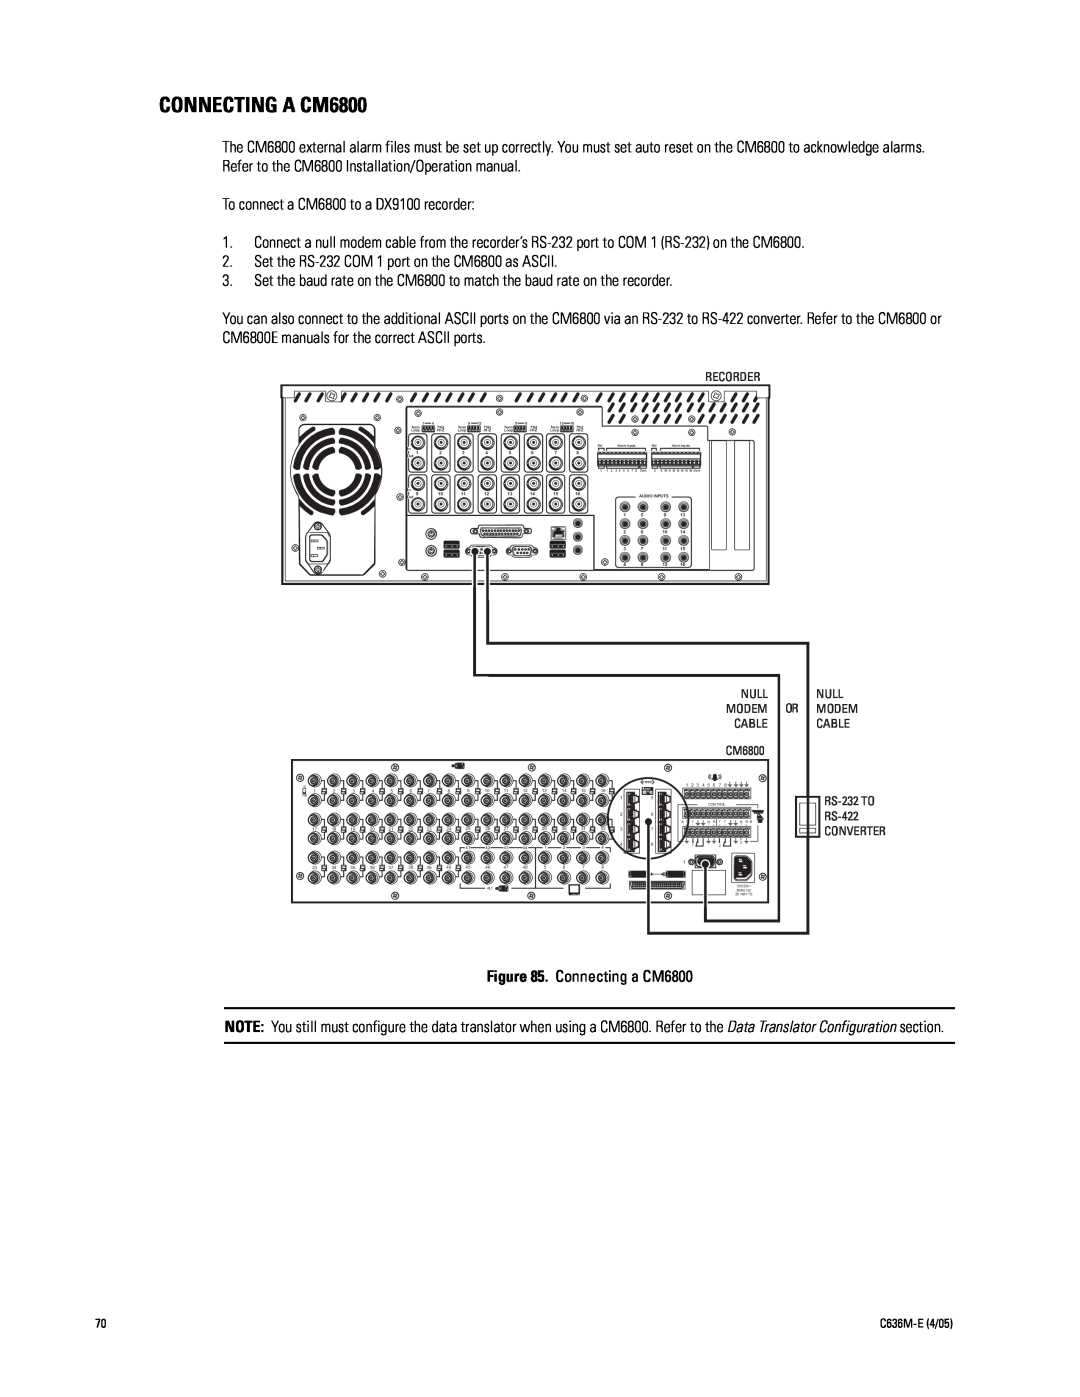 Pelco DX9100 installation manual CONNECTING A CM6800 